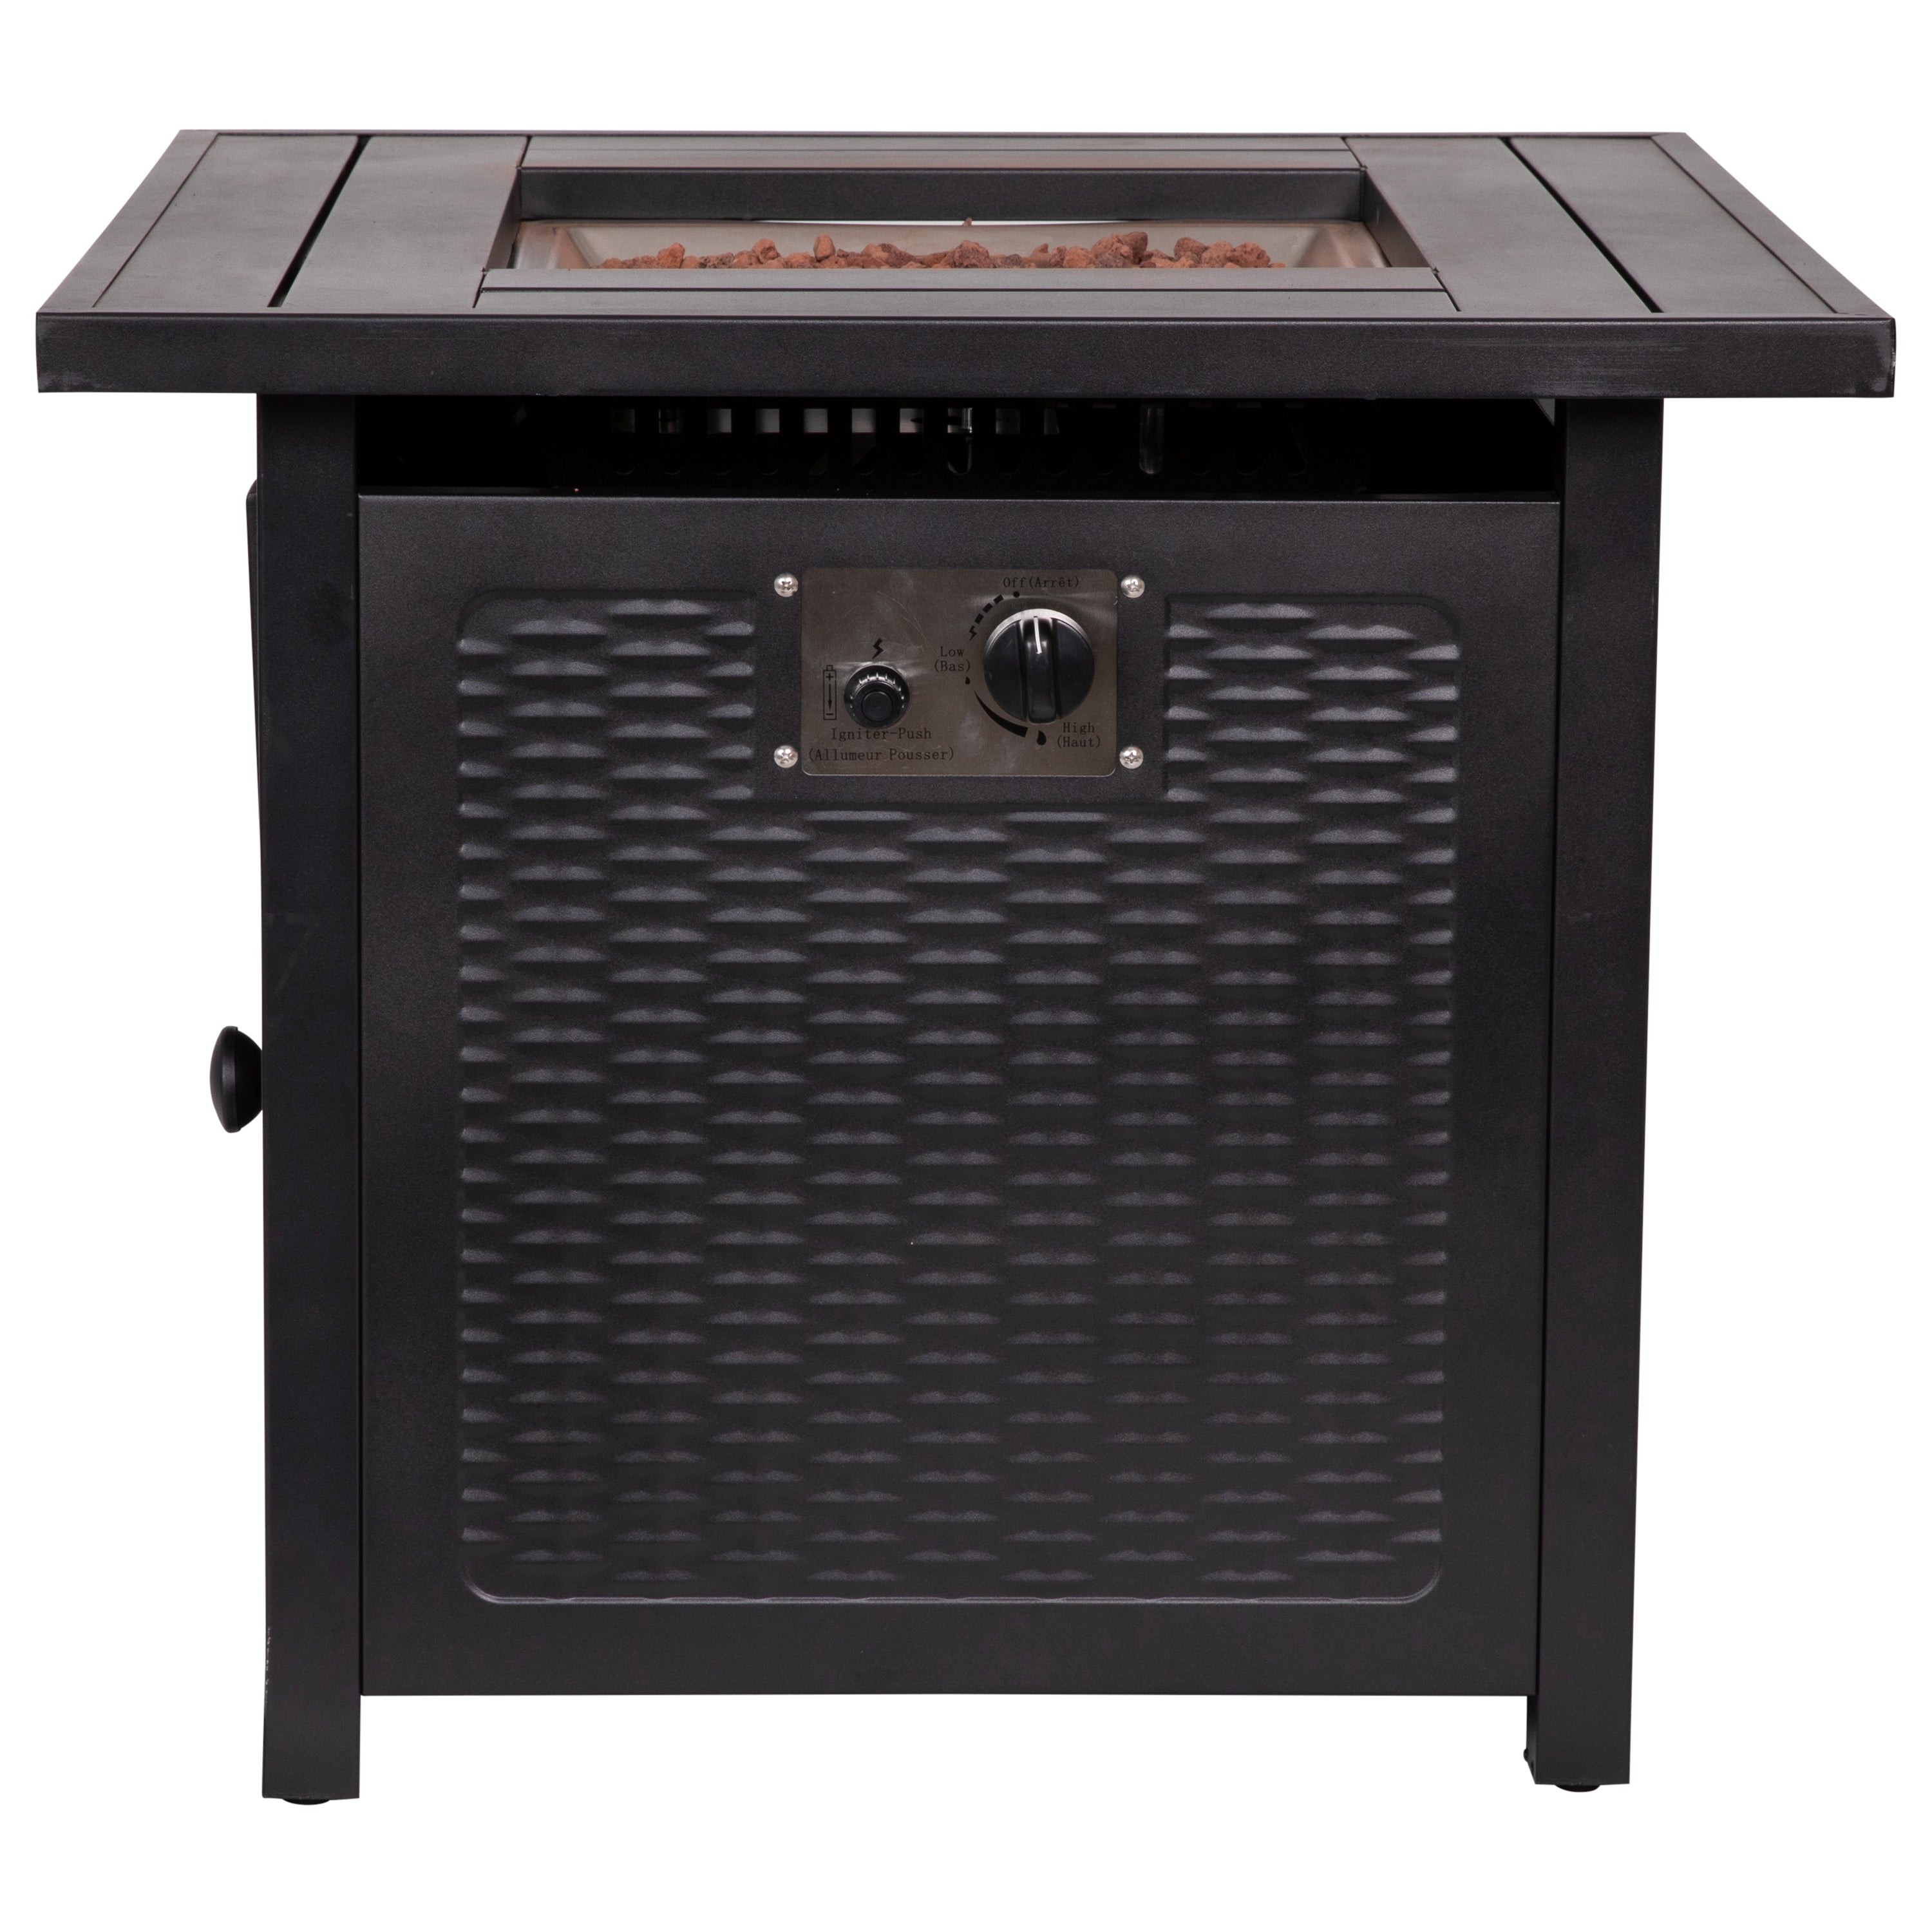 Olympia 50,000 BTU Outdoor Propane Gas Fire Pit Table with Stainless Steel Tabletop, Lid, Lava Rocks, and Steel Wicker Detail Base-Outdoor FirePit-Flash Furniture-Wall2Wall Furnishings